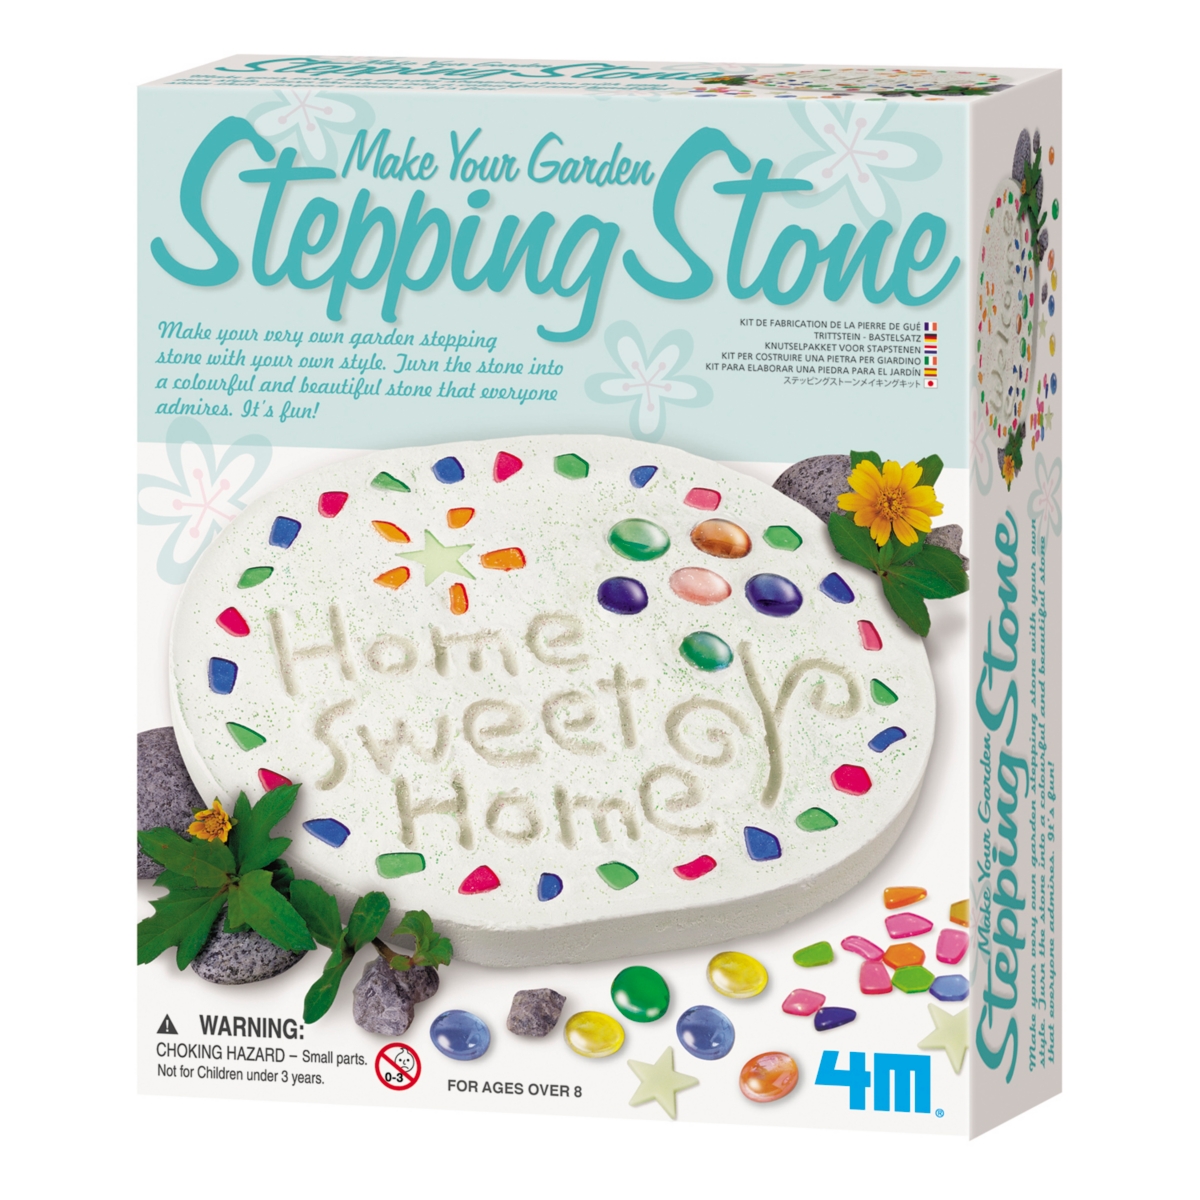 First & Main 4m Make Your Garden Stepping Stone Kit In Multi